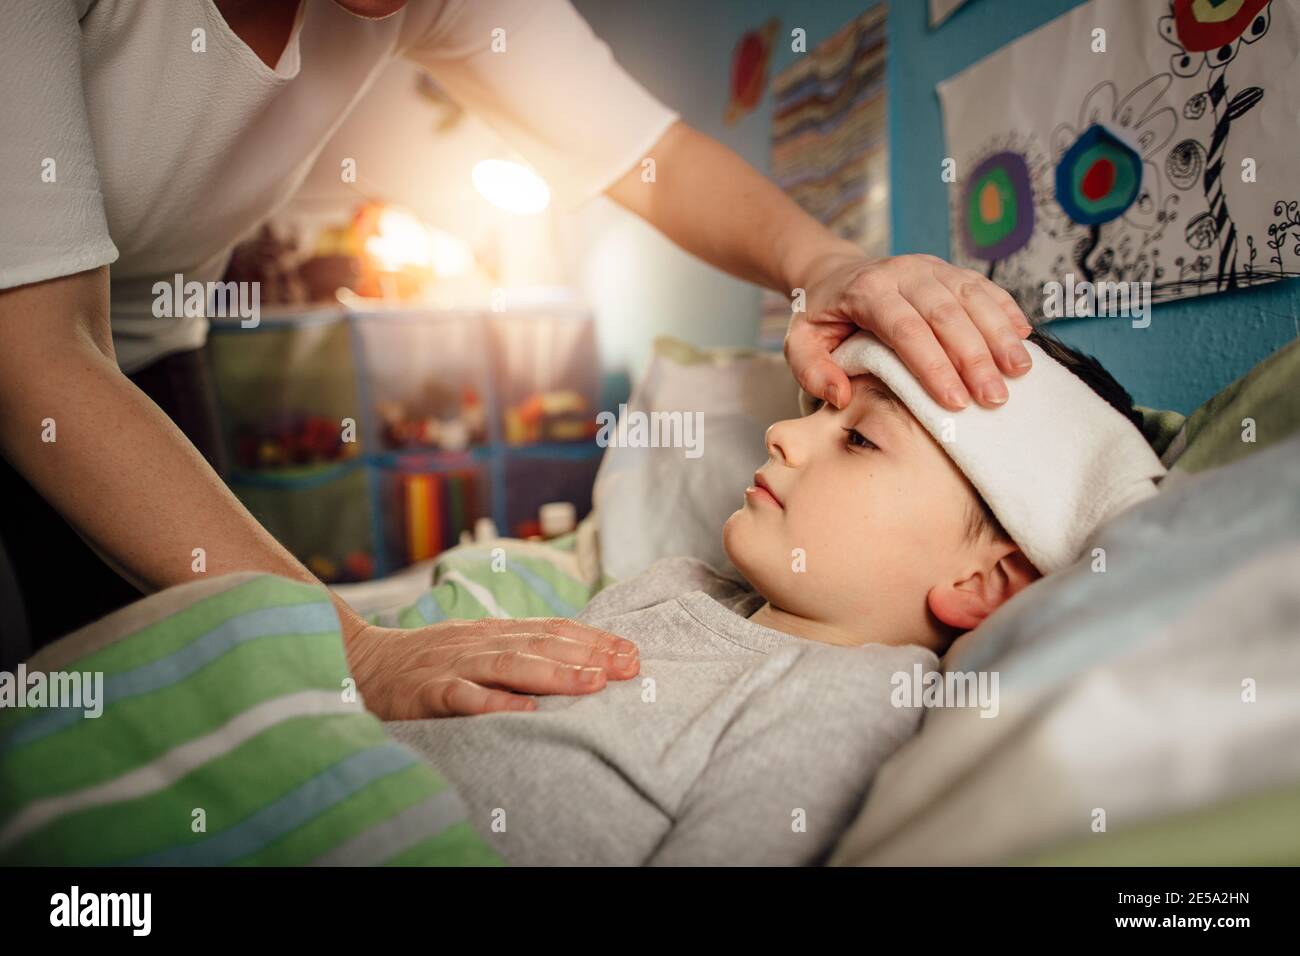 A sick child lying in a bed with a wet cloth on his forehead. A mother taking care of her ill child at home in the night. Stock Photo